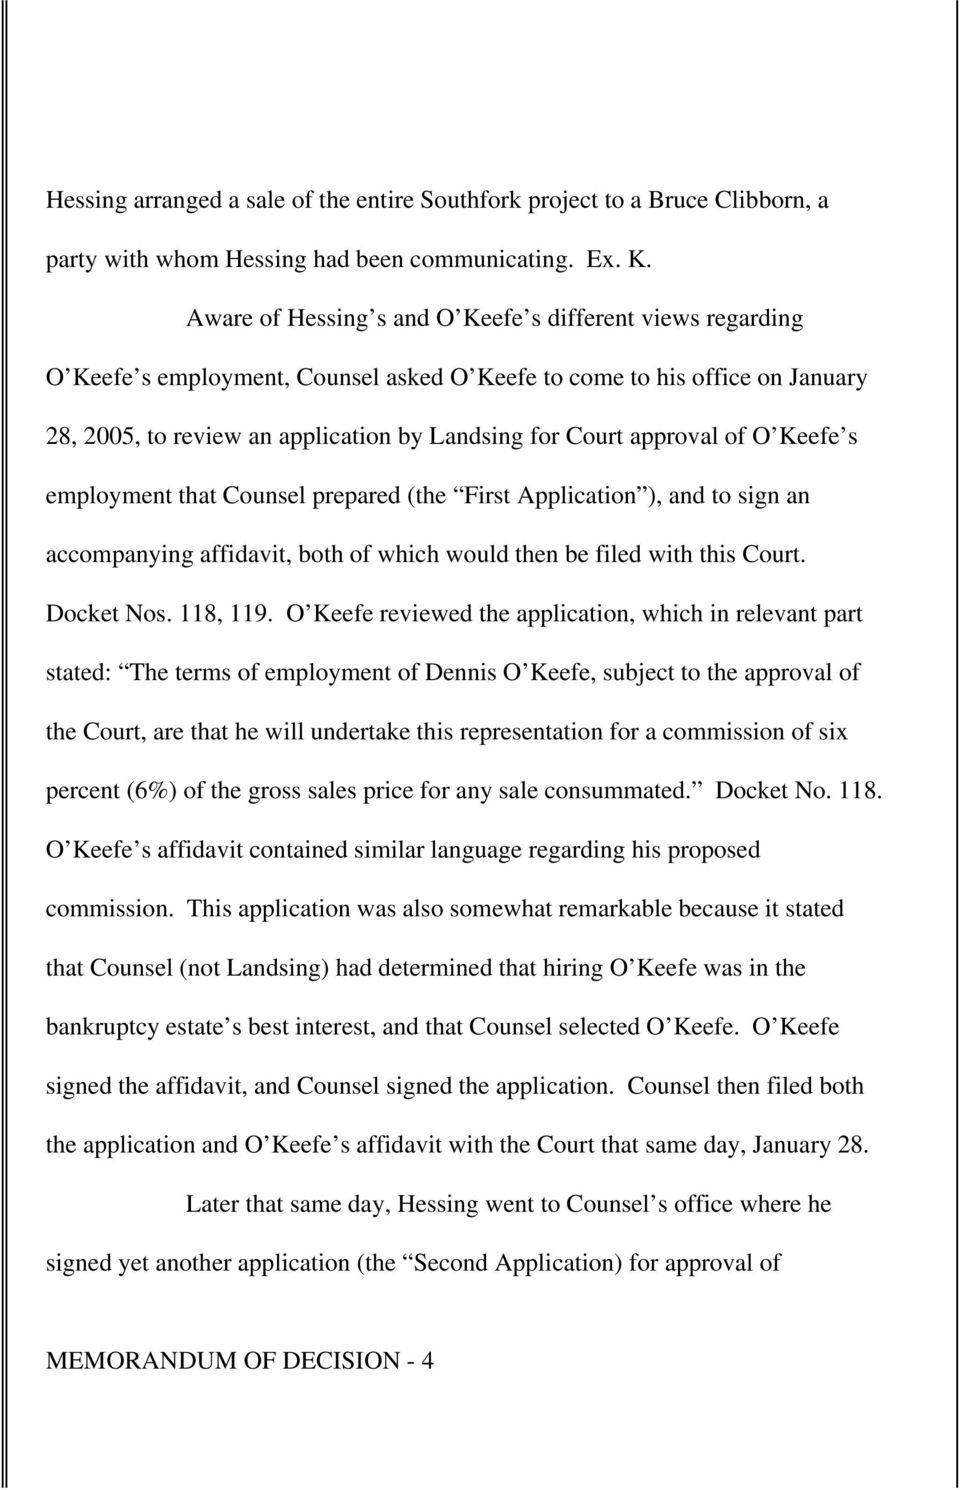 approval of O Keefe s employment that Counsel prepared (the First Application ), and to sign an accompanying affidavit, both of which would then be filed with this Court. Docket Nos. 118, 119.